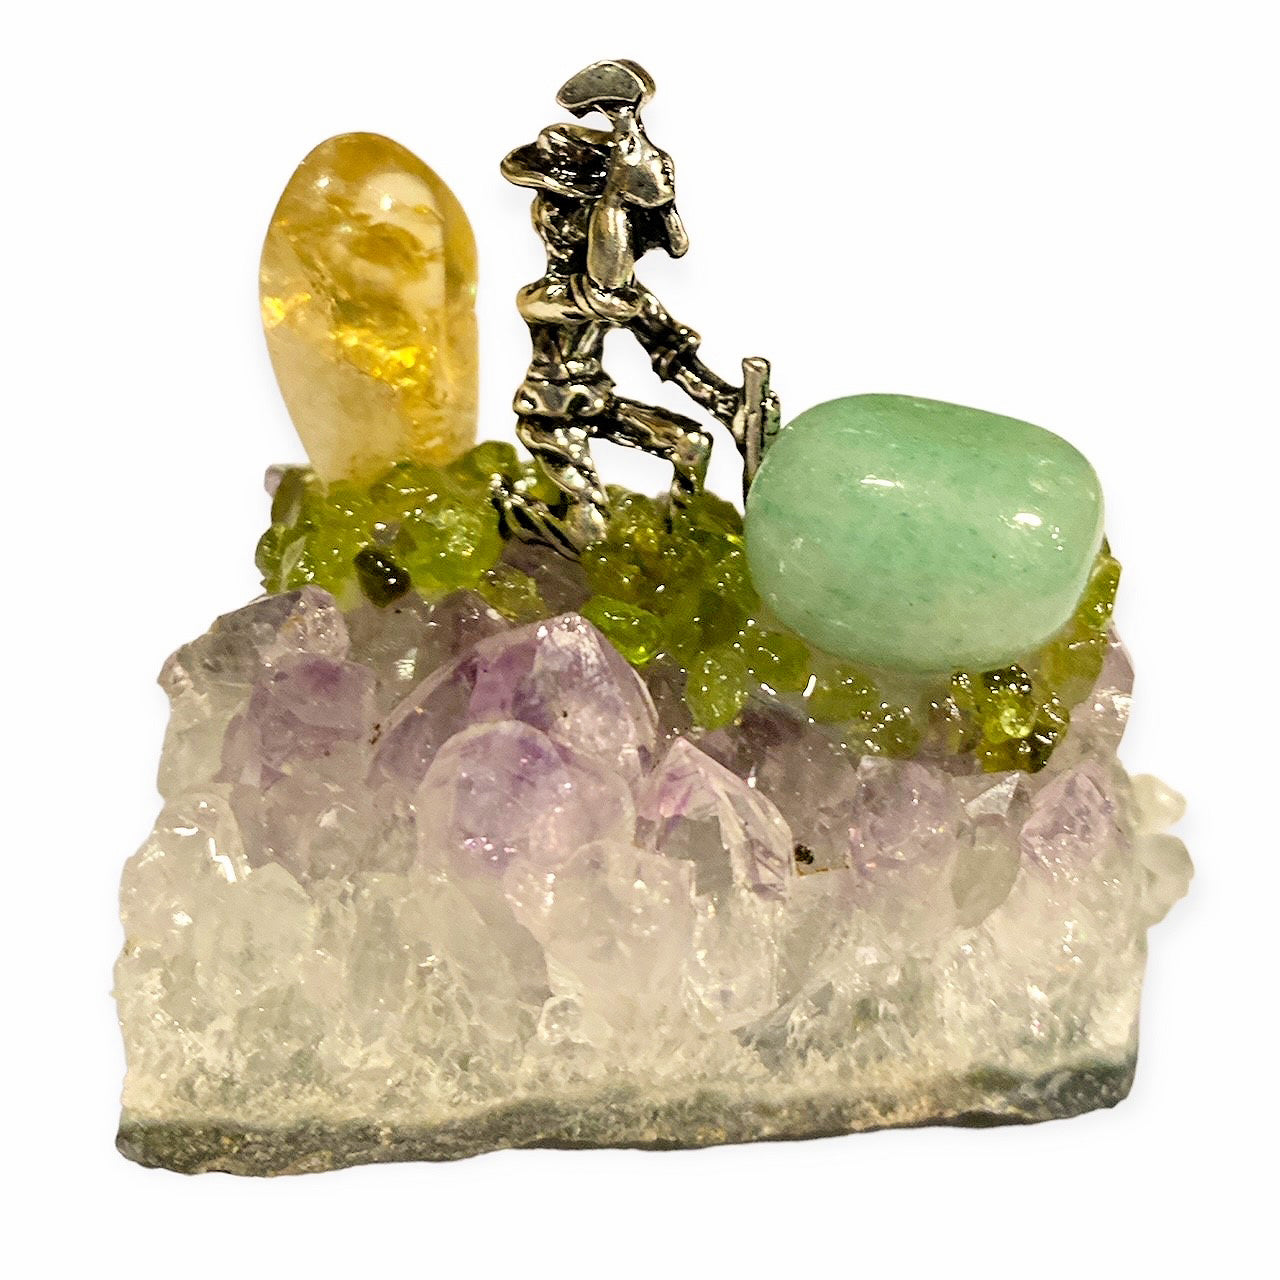 LARGE MIXED GOLD PANNERS & MINERS ON AMETHYST CLUSTER with Citrine - 6.3 x 4.3 cm - China - NEW1122